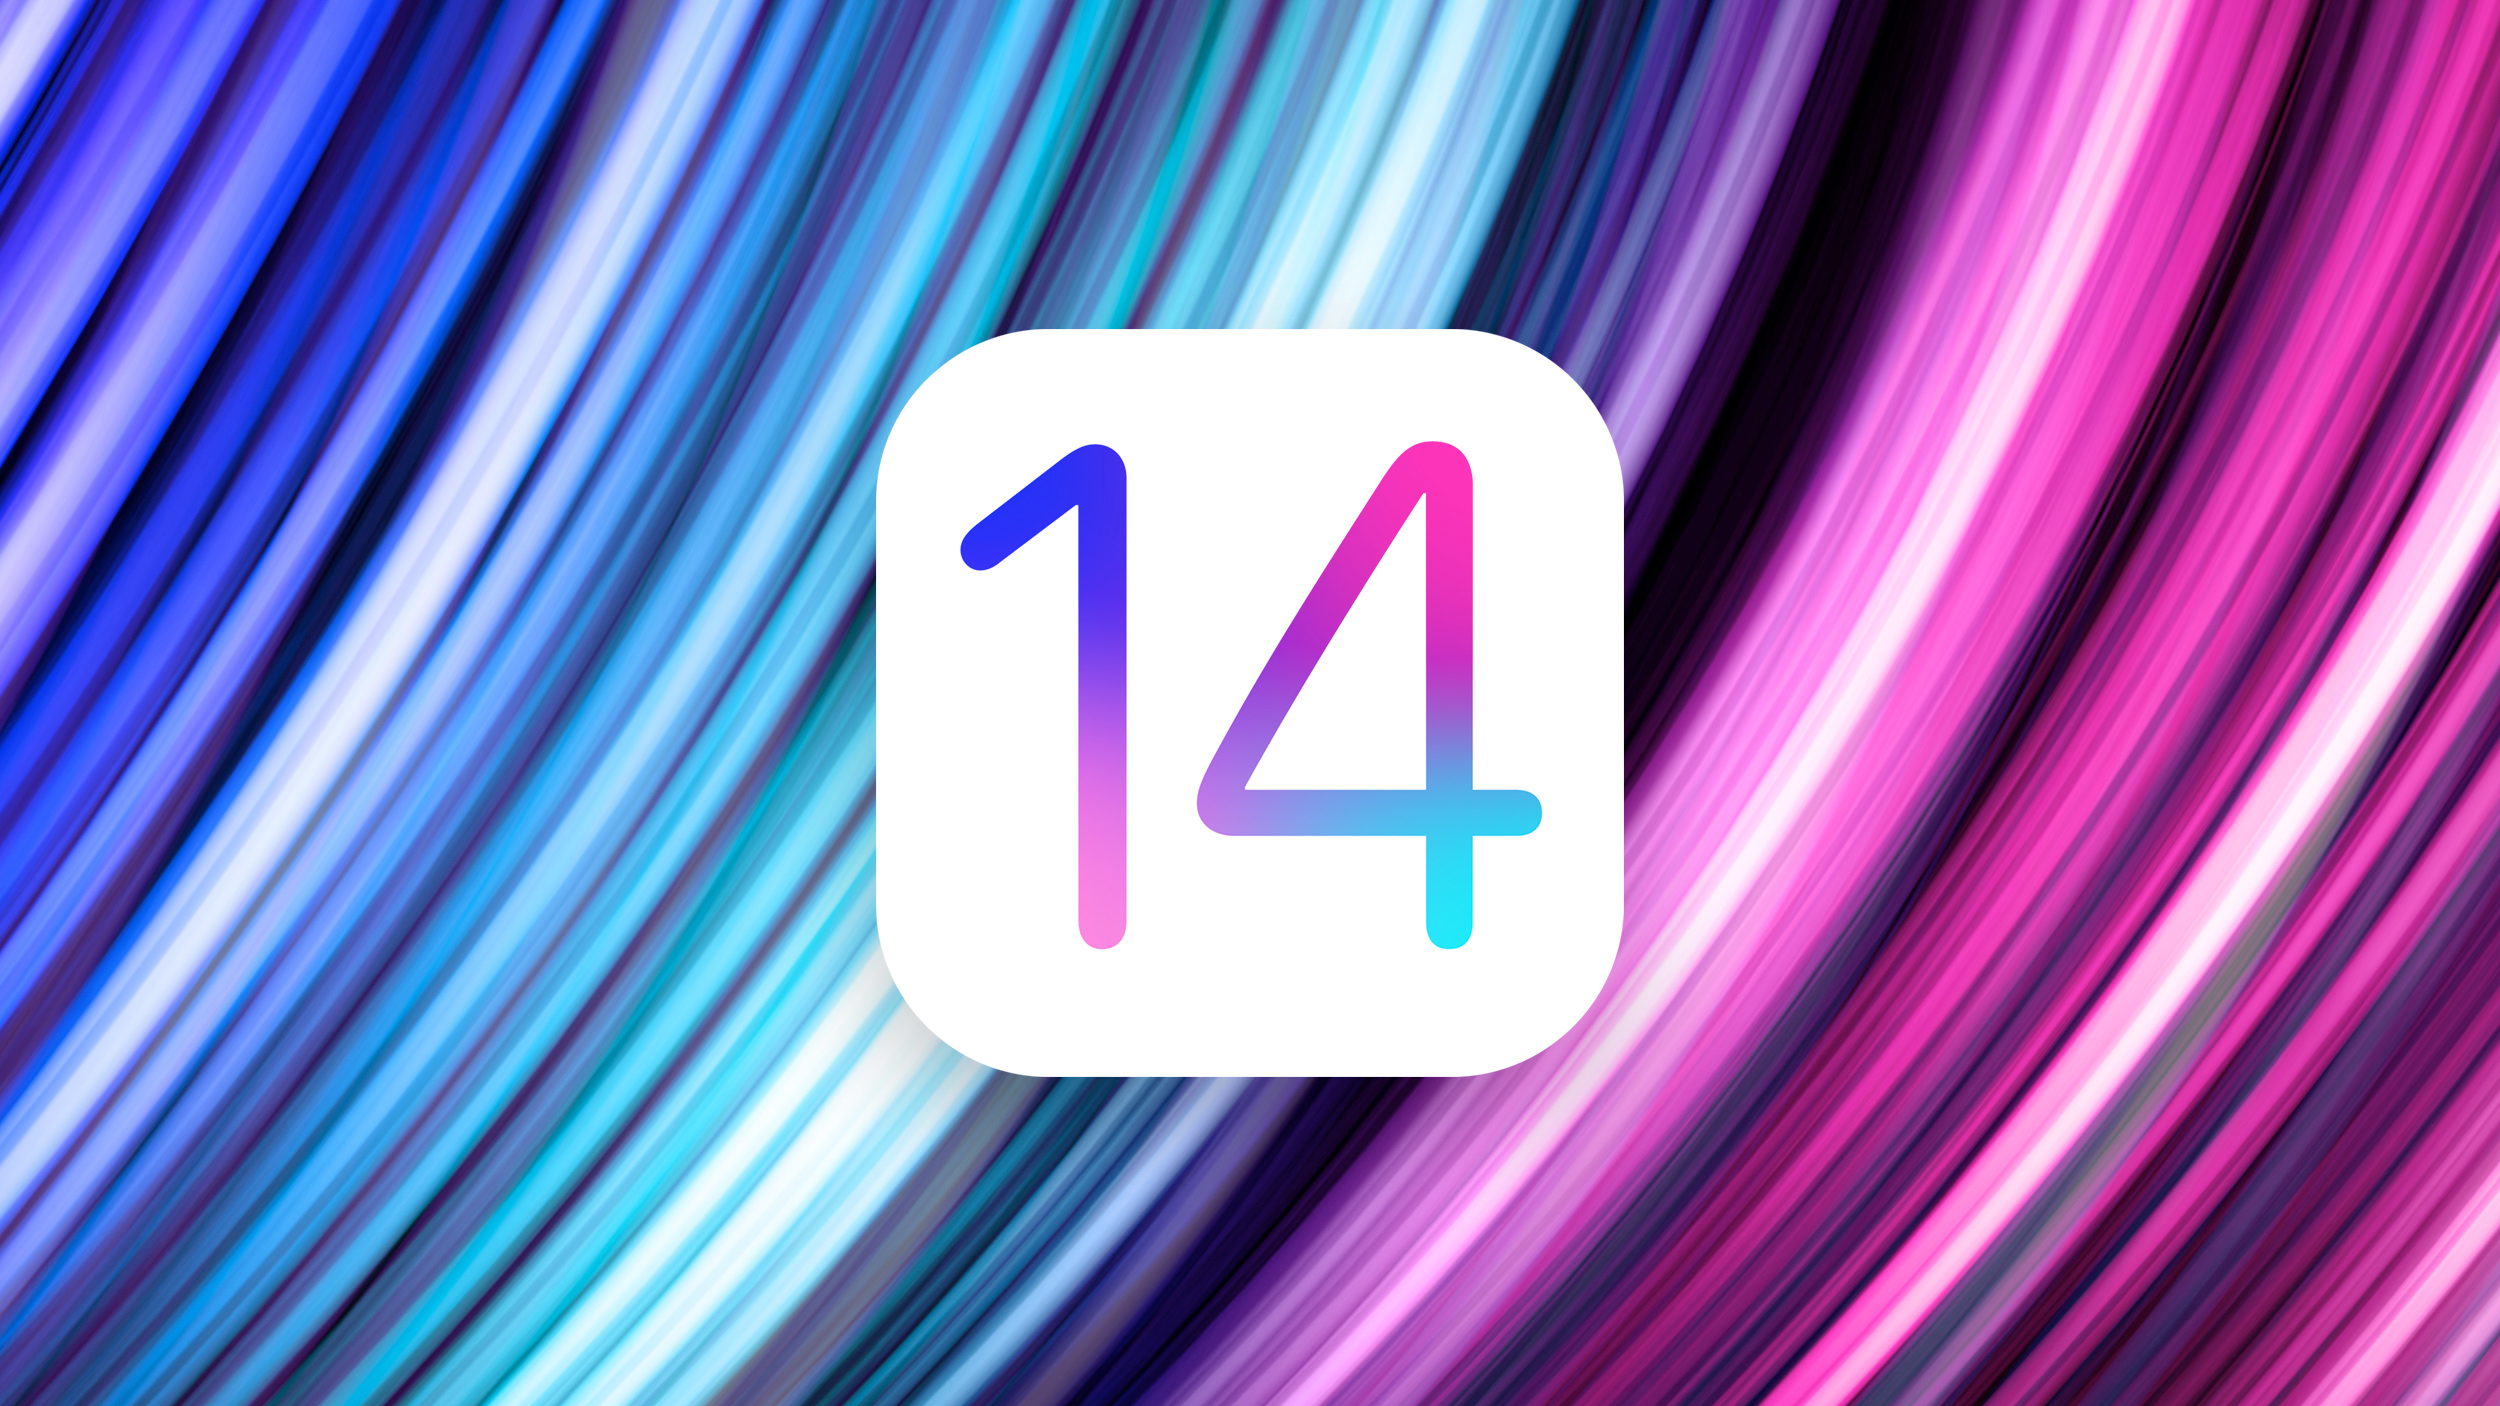 iOS 14: All the Rumored New Features!